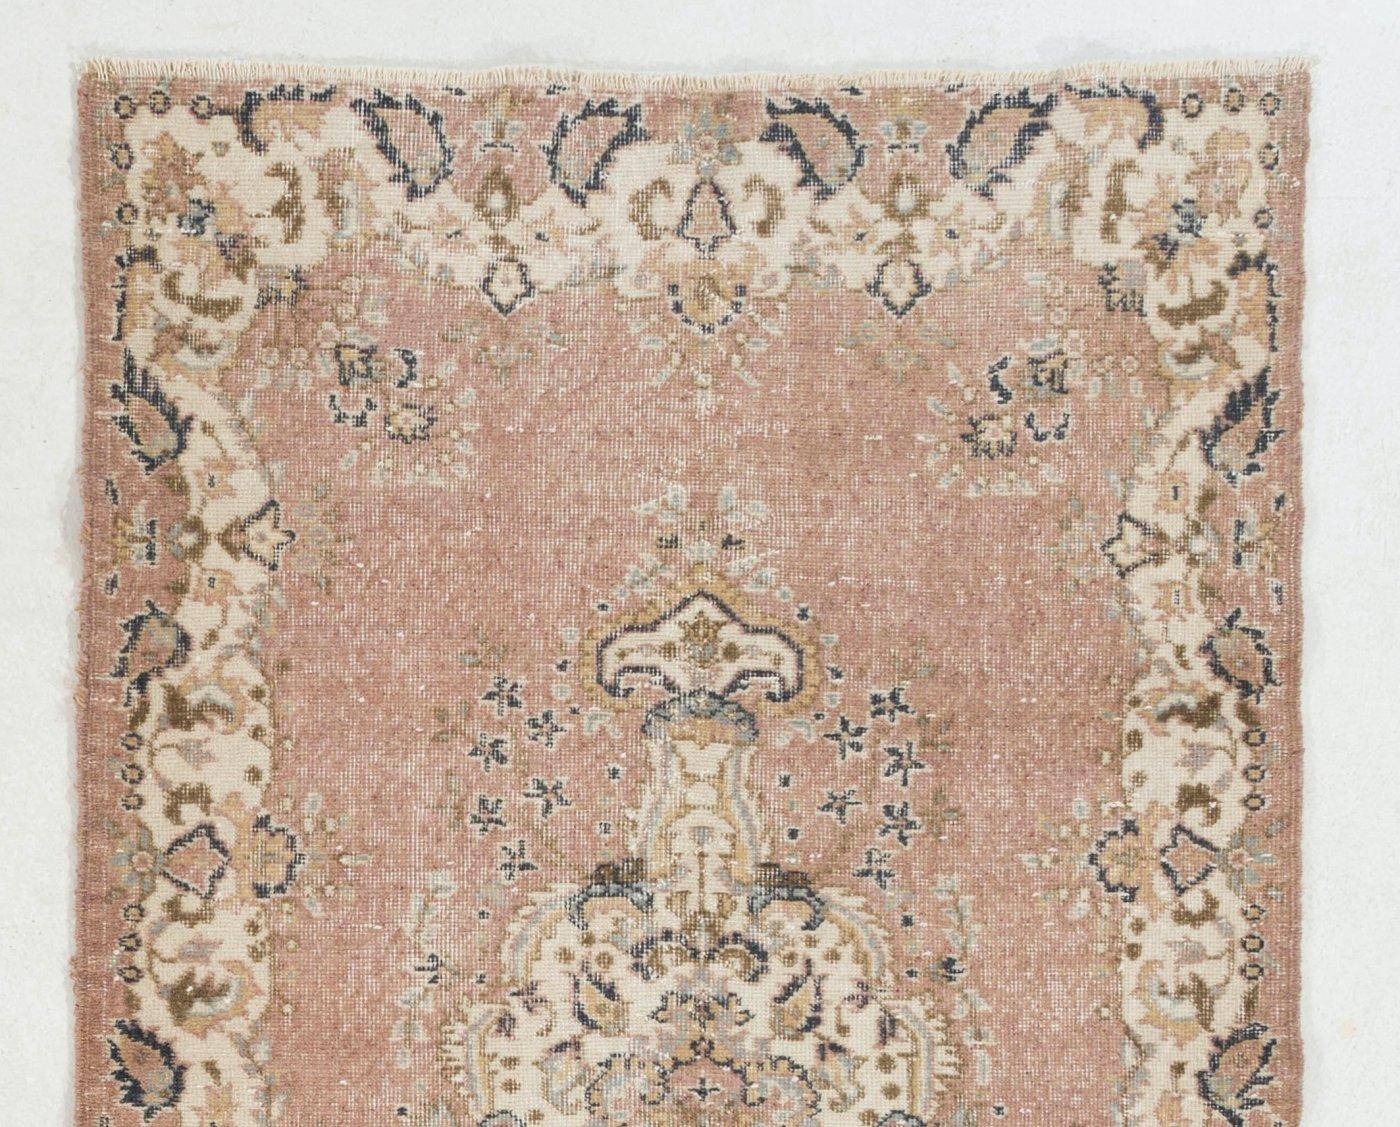 A vintage hand-knotted accent rug from Turkey made in the 1960s with wool pile on cotton foundation. It features a lovely floral-themed design with a central medallion and a curvilinear border, both decorated intricately with lush floral heads,